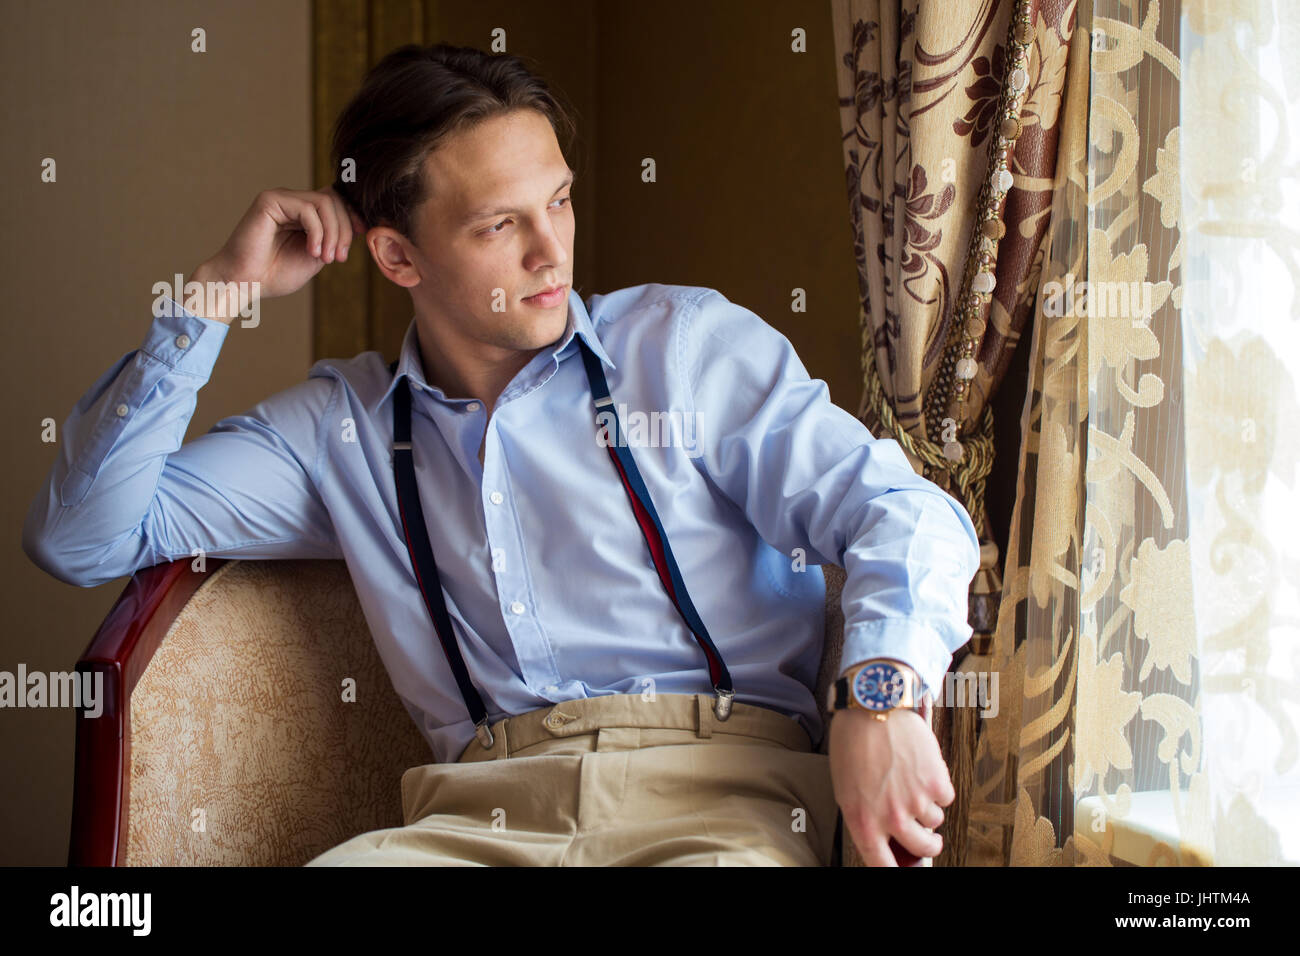 The groom is sitting in the armchair, looking out of the window, waiting. In the room. Stock Photo